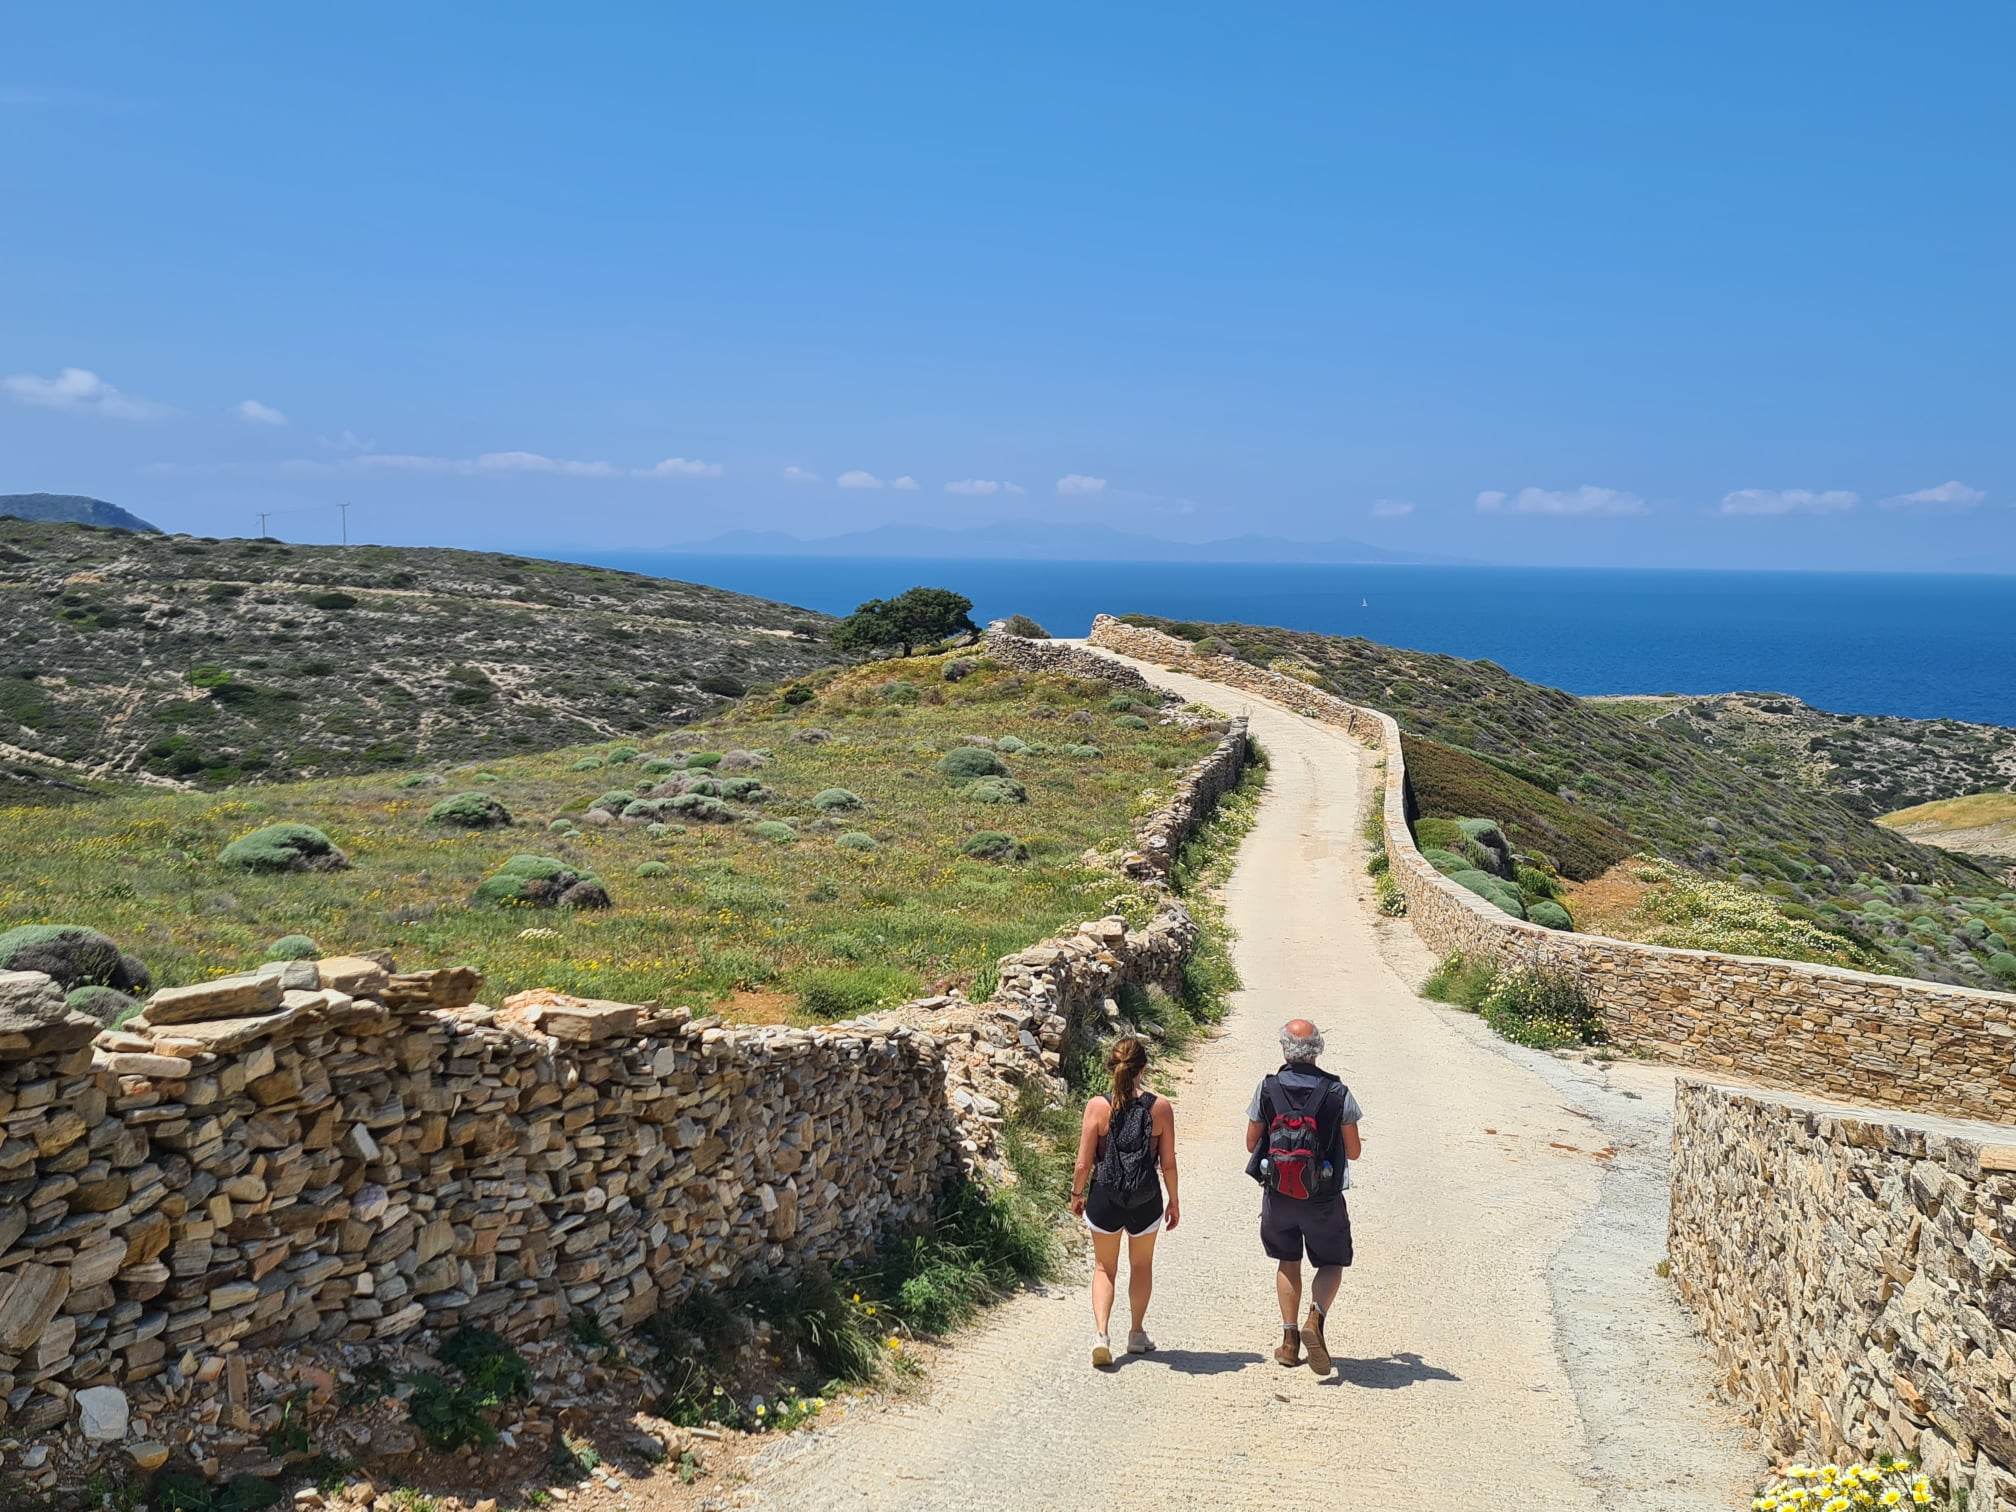 Antiparos Hiking: The ultimate guide to the best Antiparos hikes and trails